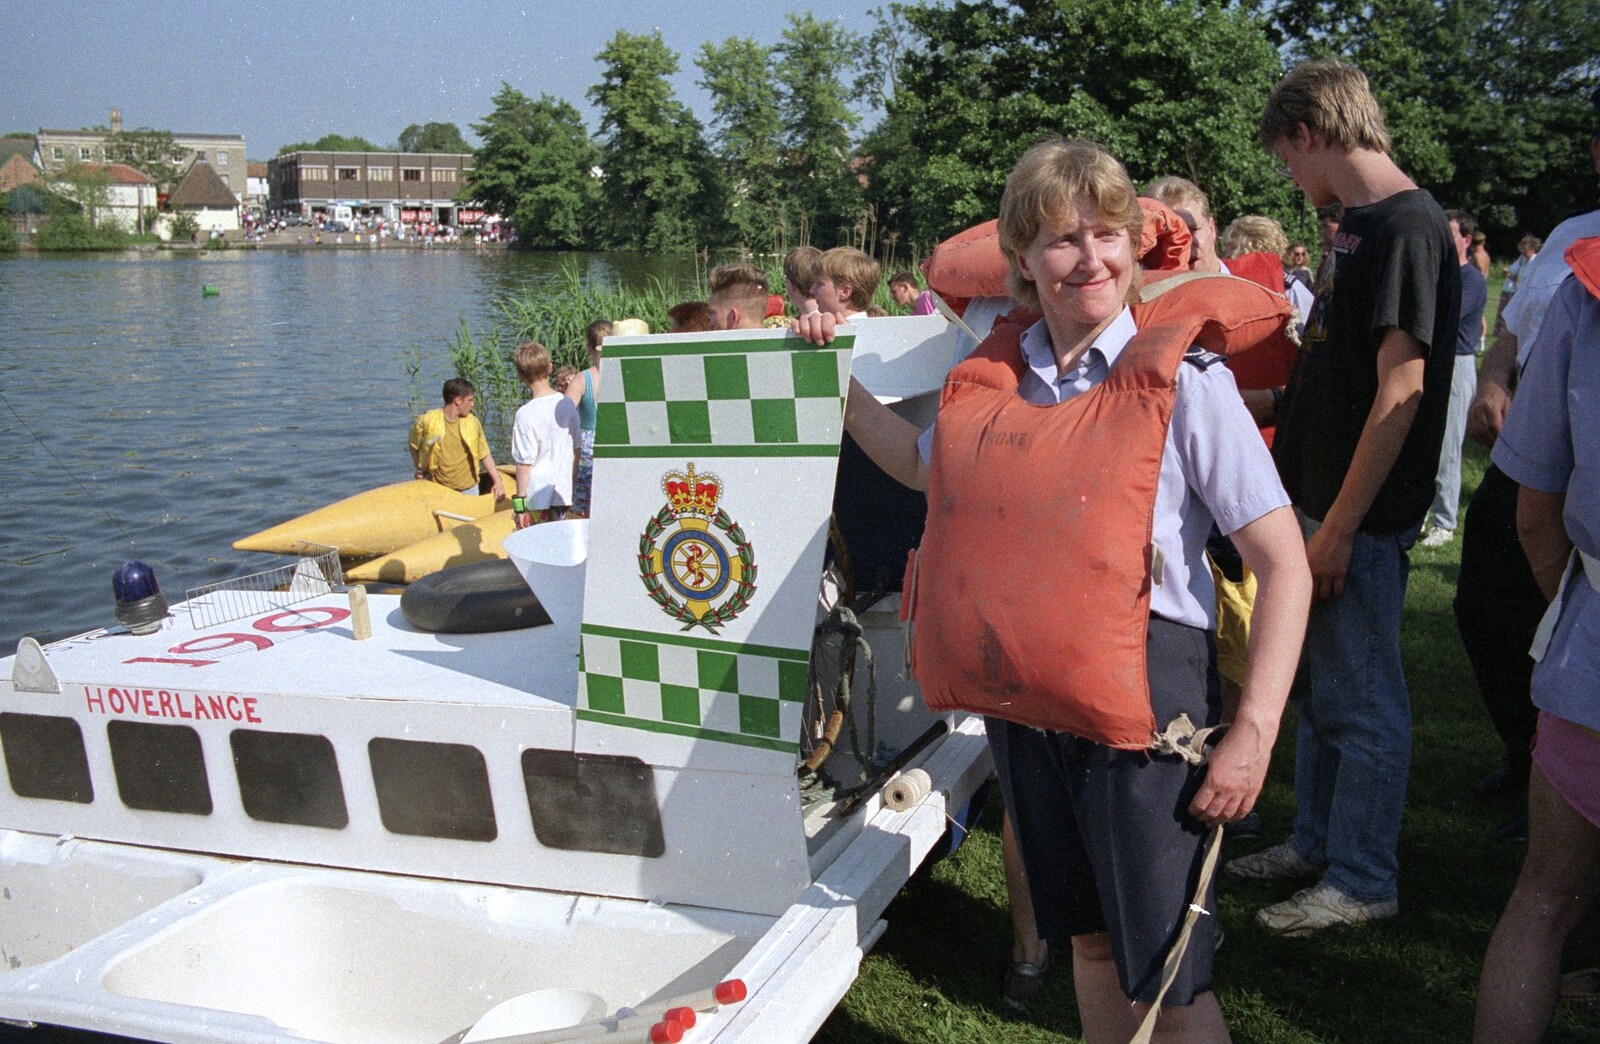 Jan stands proudly next to 'Hoverlance' before the off from The Diss Raft Race, Diss Mere, Norfolk - 6th July 1991